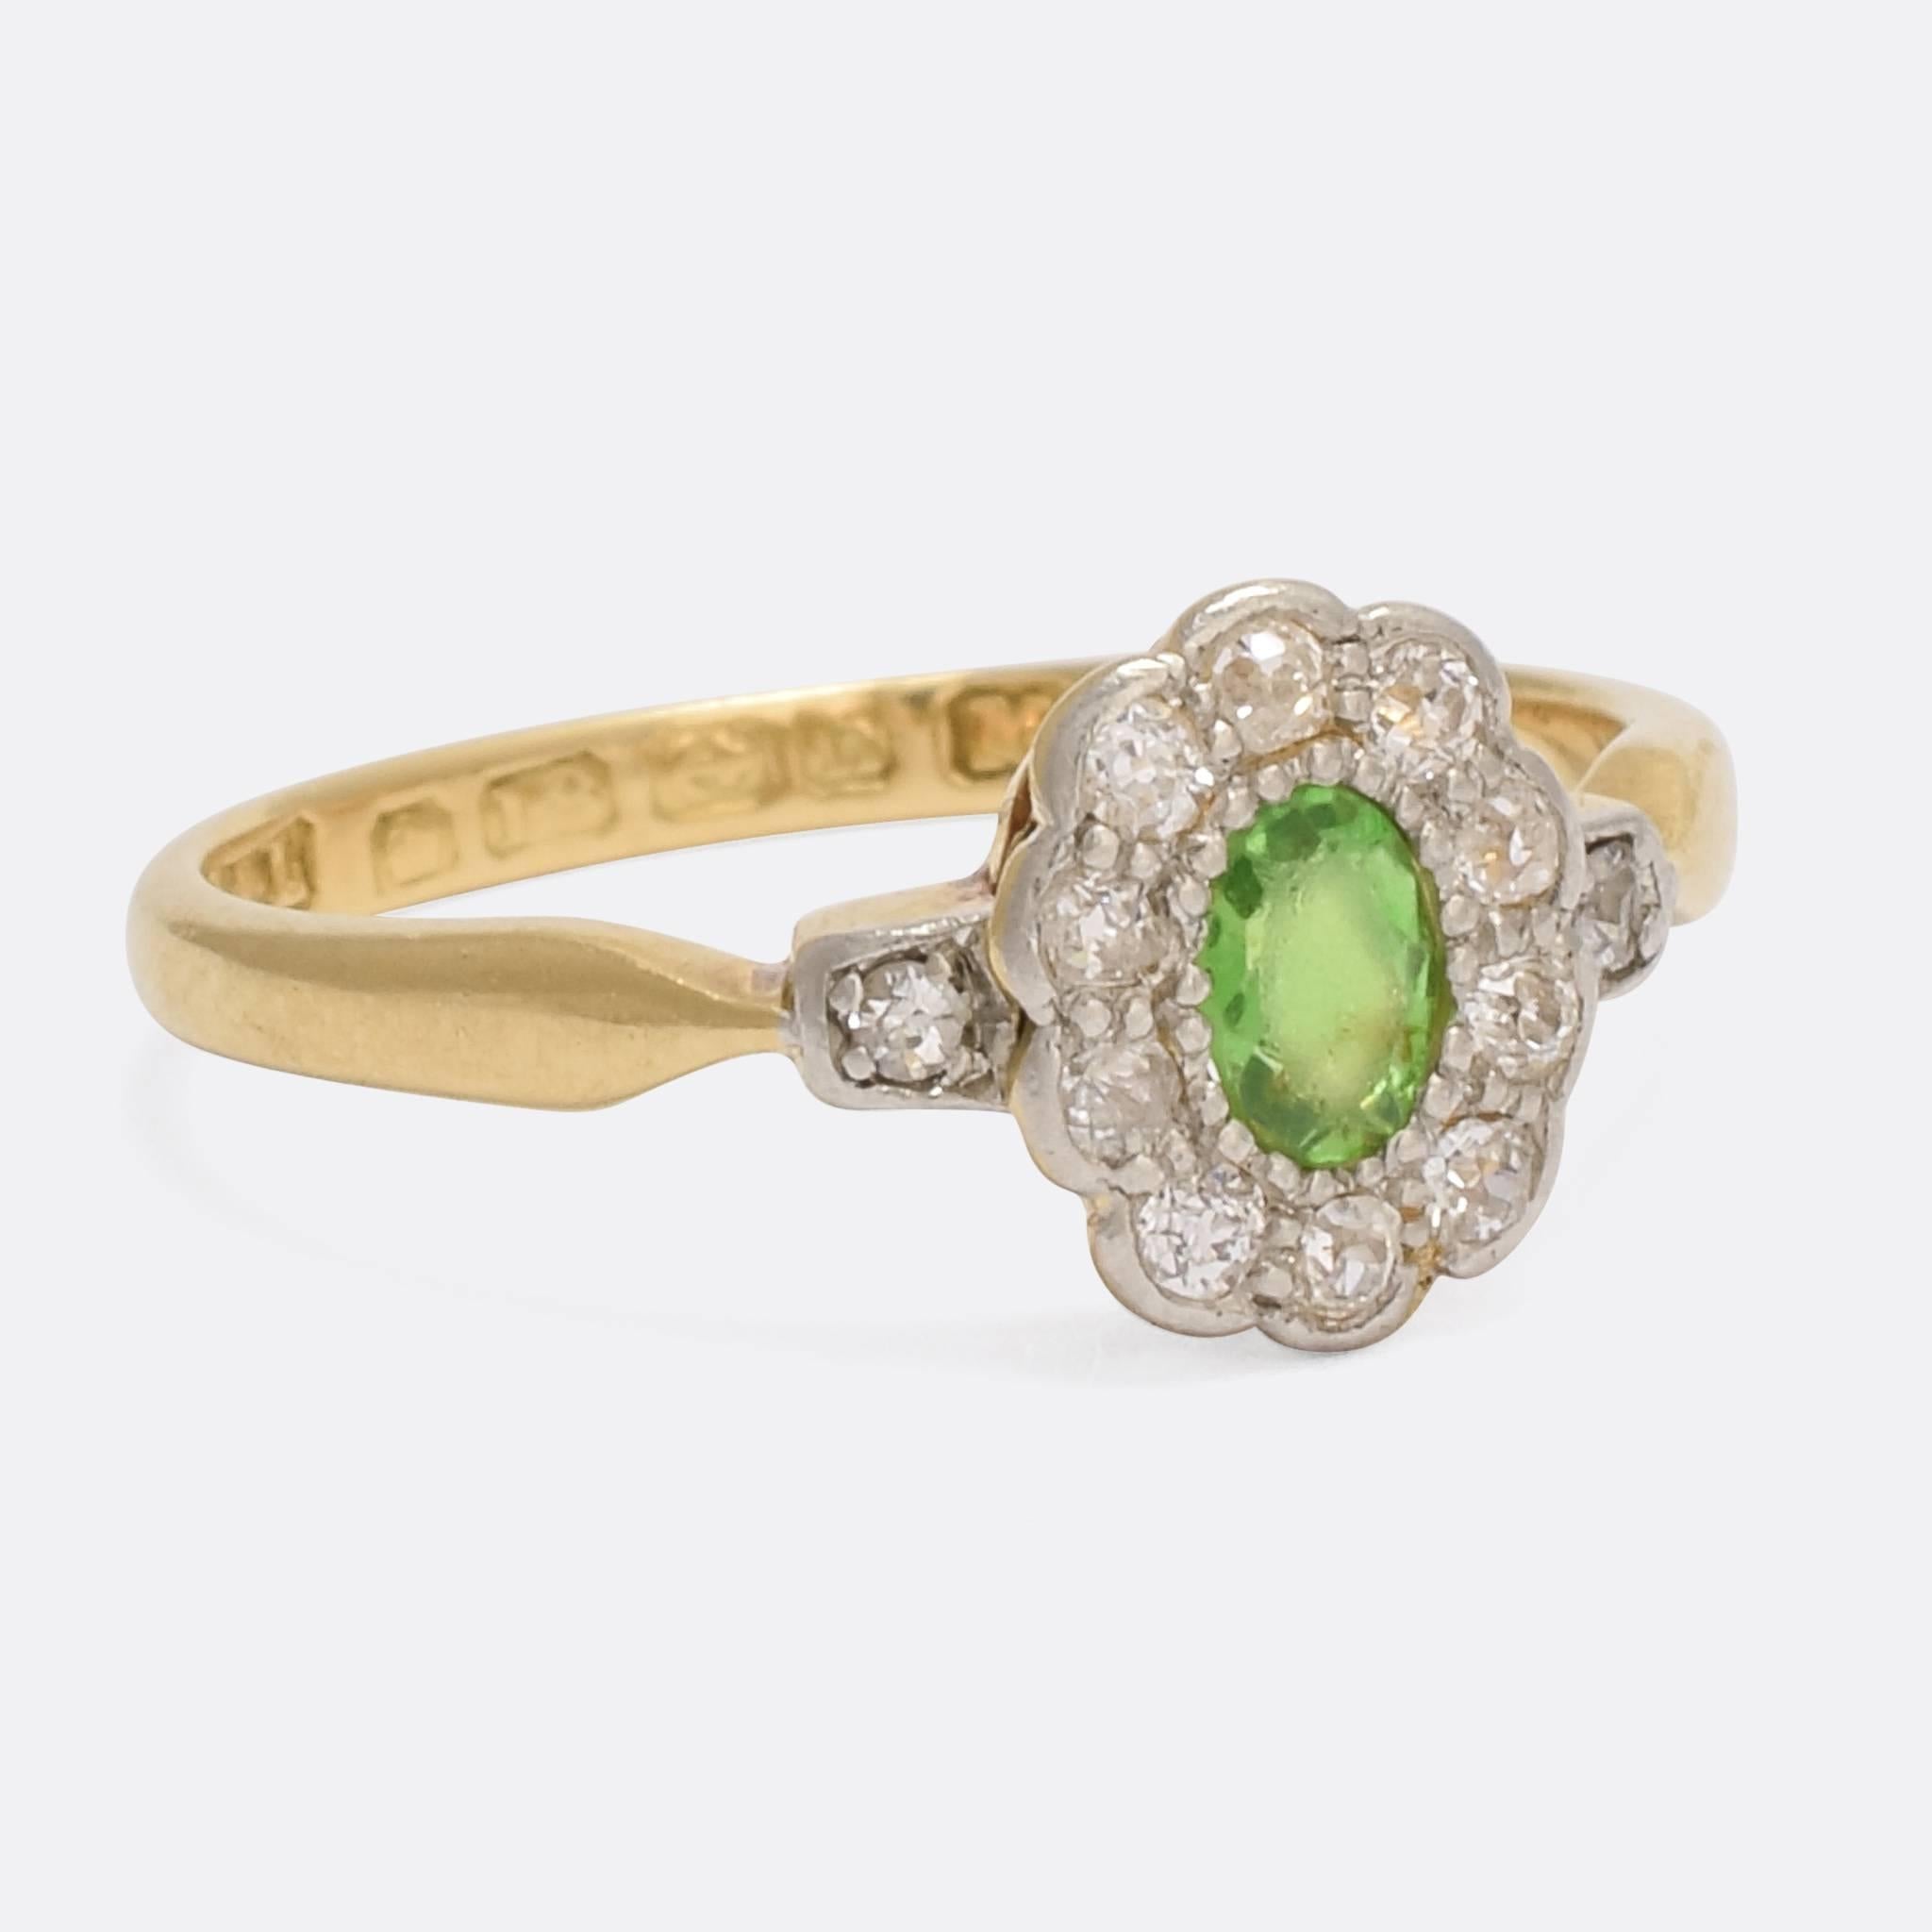 A pretty vintage flower cluster ring, set with a central Demantoid garnet (unusual to see in a ring of this style) and a halo of white diamond 